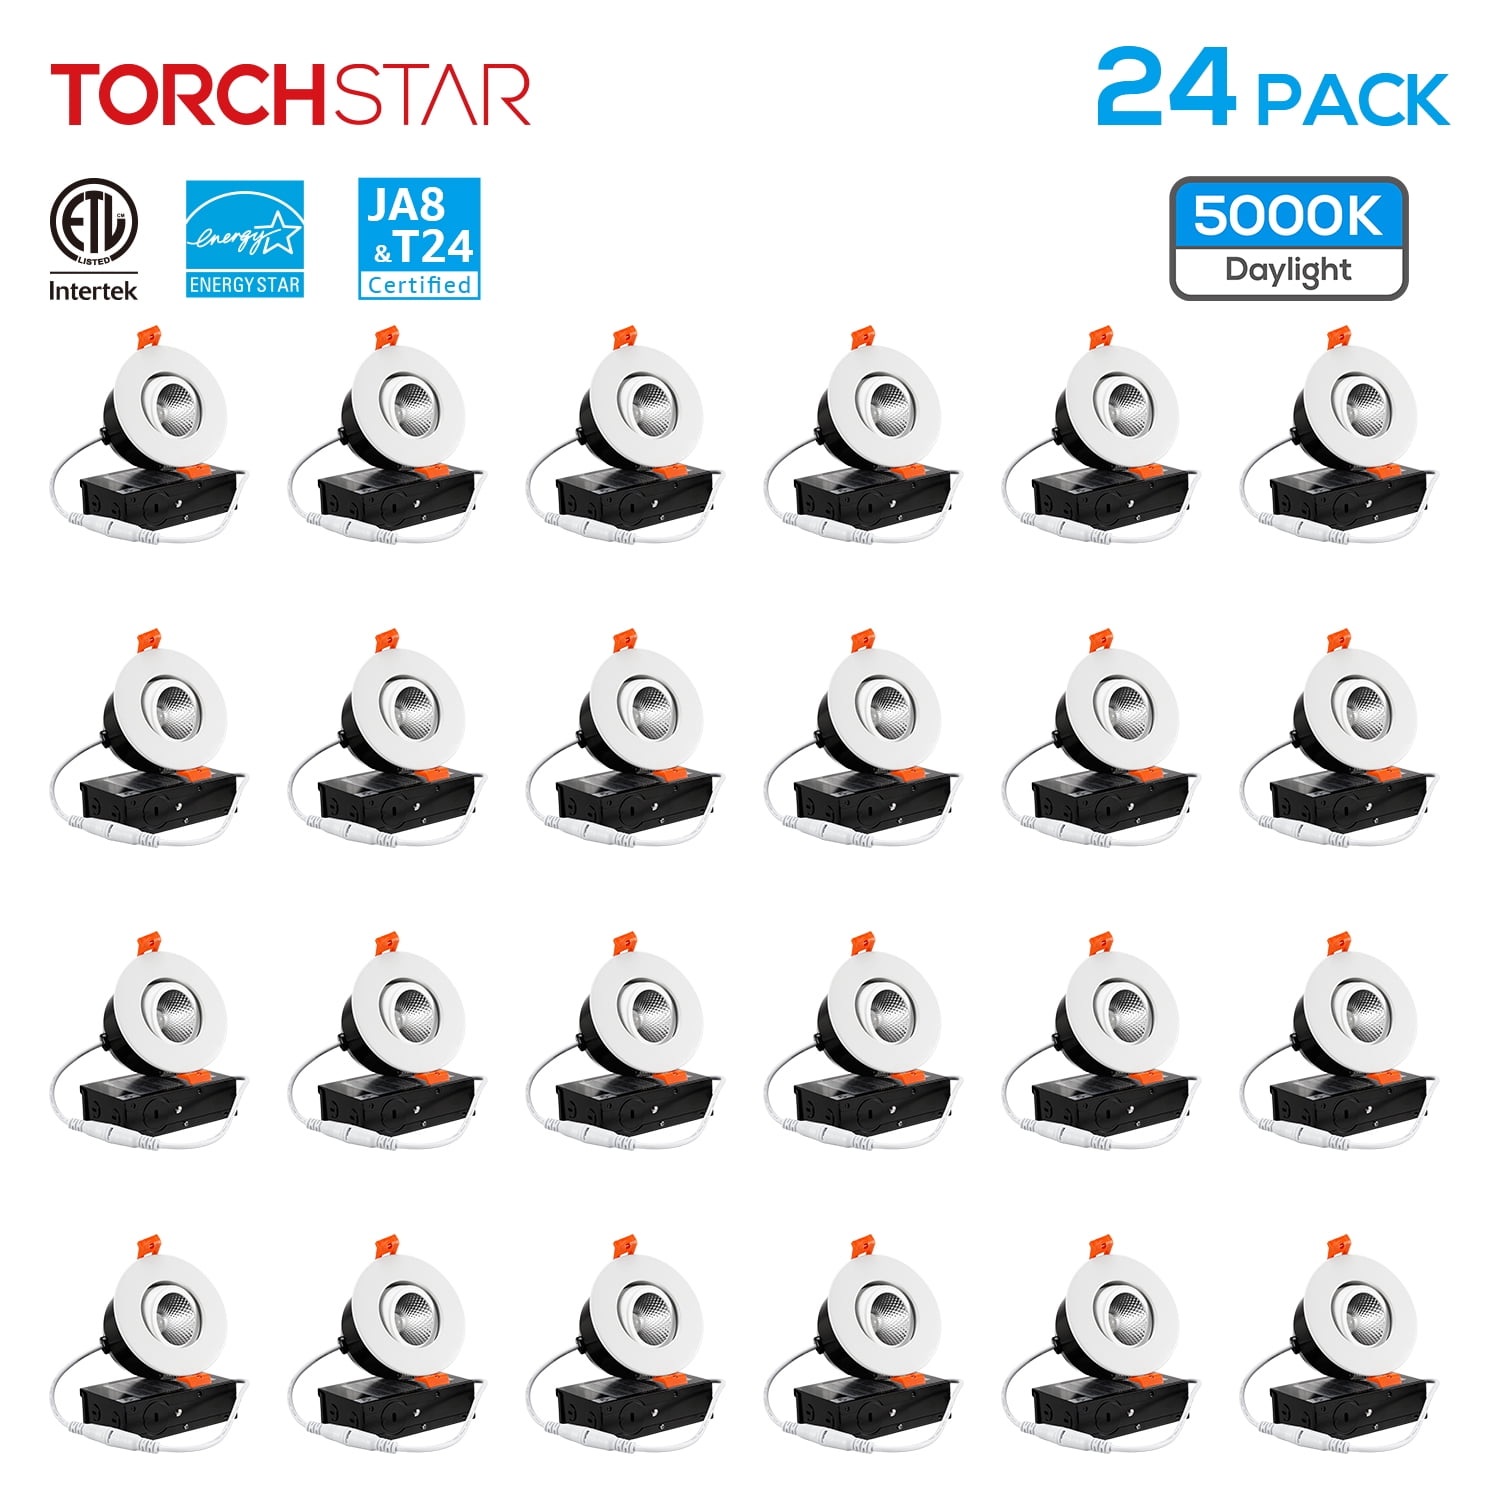 TORCHSTAR 24-Pack Inch Gimbal LED Dimmable Recessed Light with J-Box, 7W (50W  Eqv.) 500lm, Airtight, ETL/Energy Star/JA8/Title 24, CRI 90+, 4000K Cool  White, Years Warranty, White